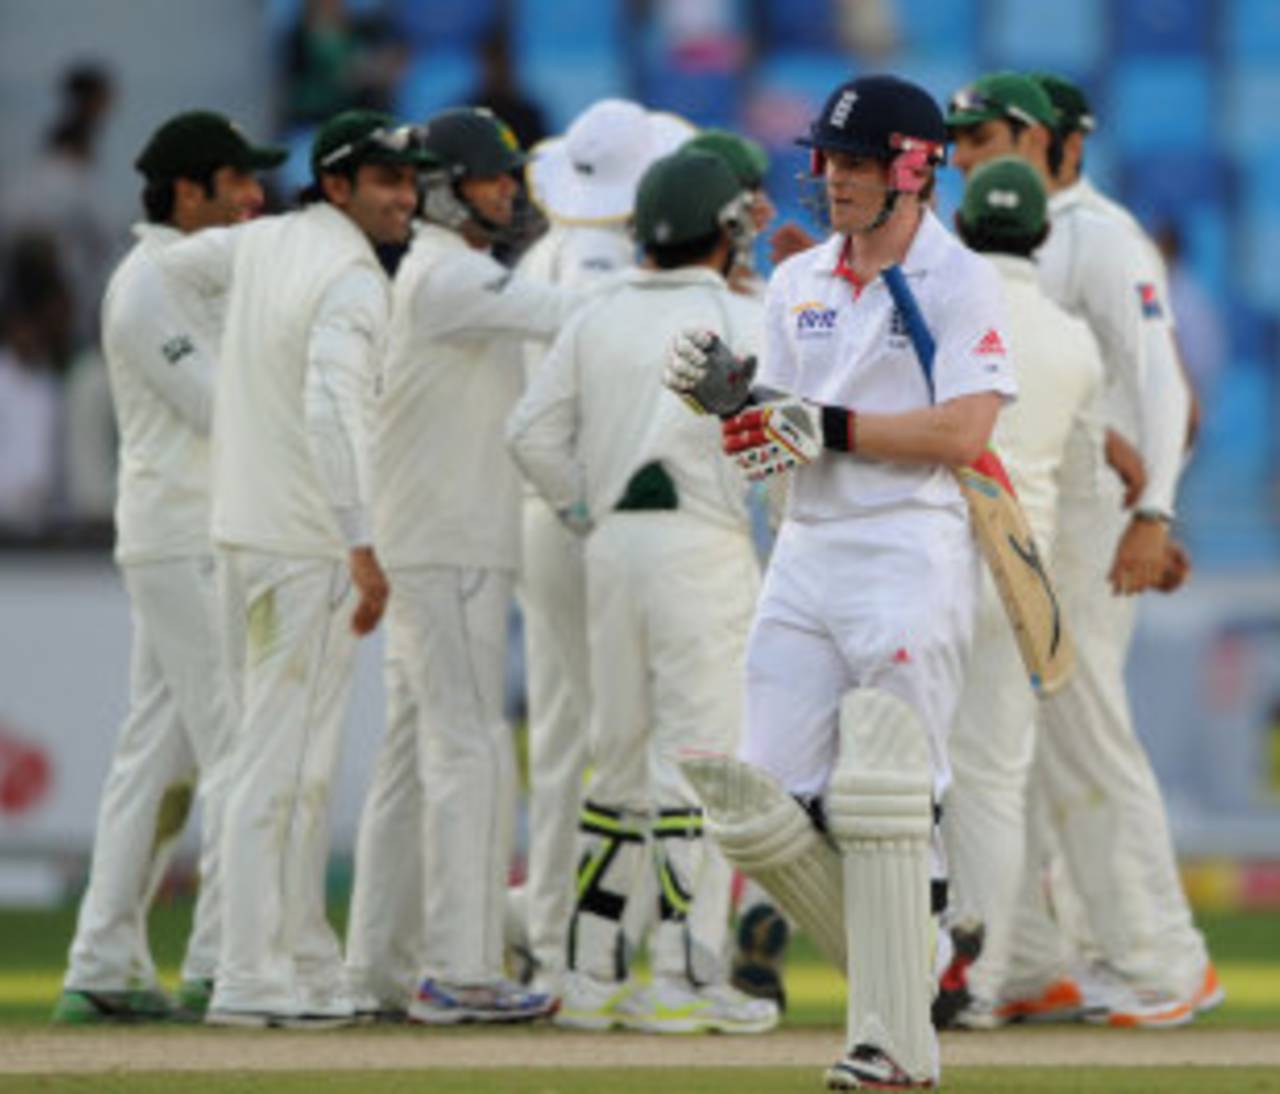 Eoin Morgan trudges back dejected after another failure, Pakistan v England, 3rd Test, Dubai, 1st day, February 3, 2012